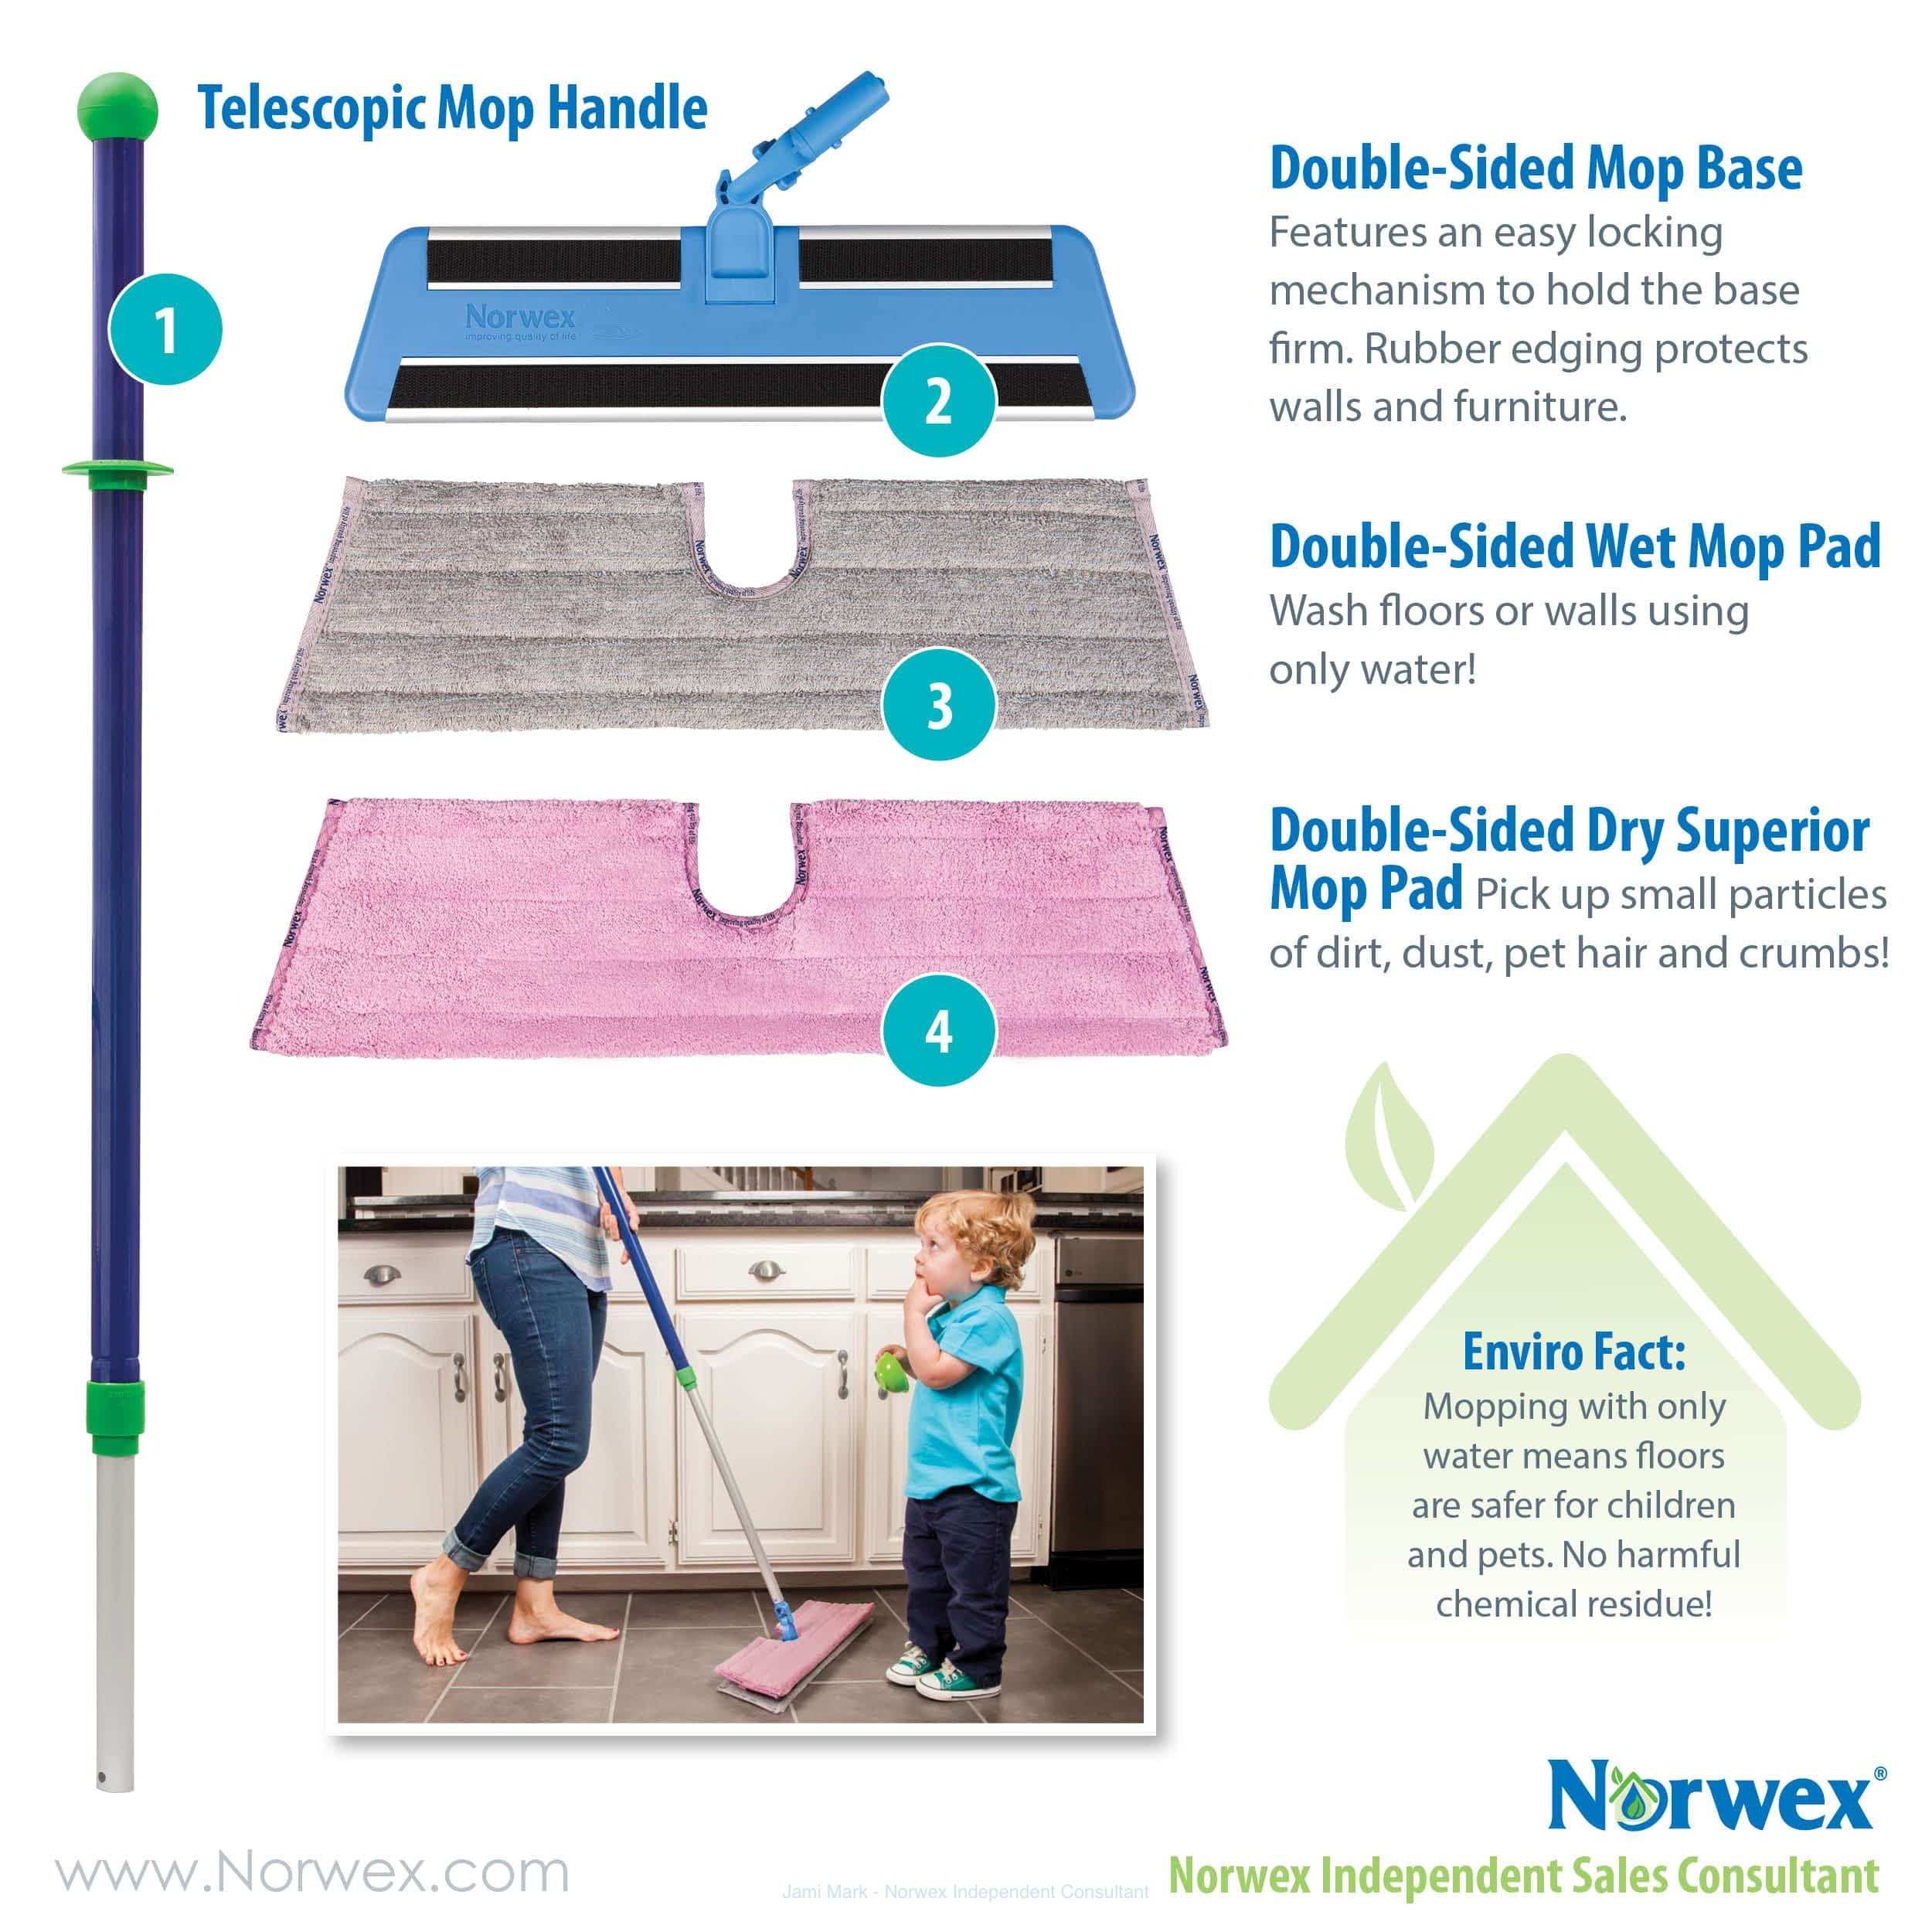 Norwex DoubleSided Mop System